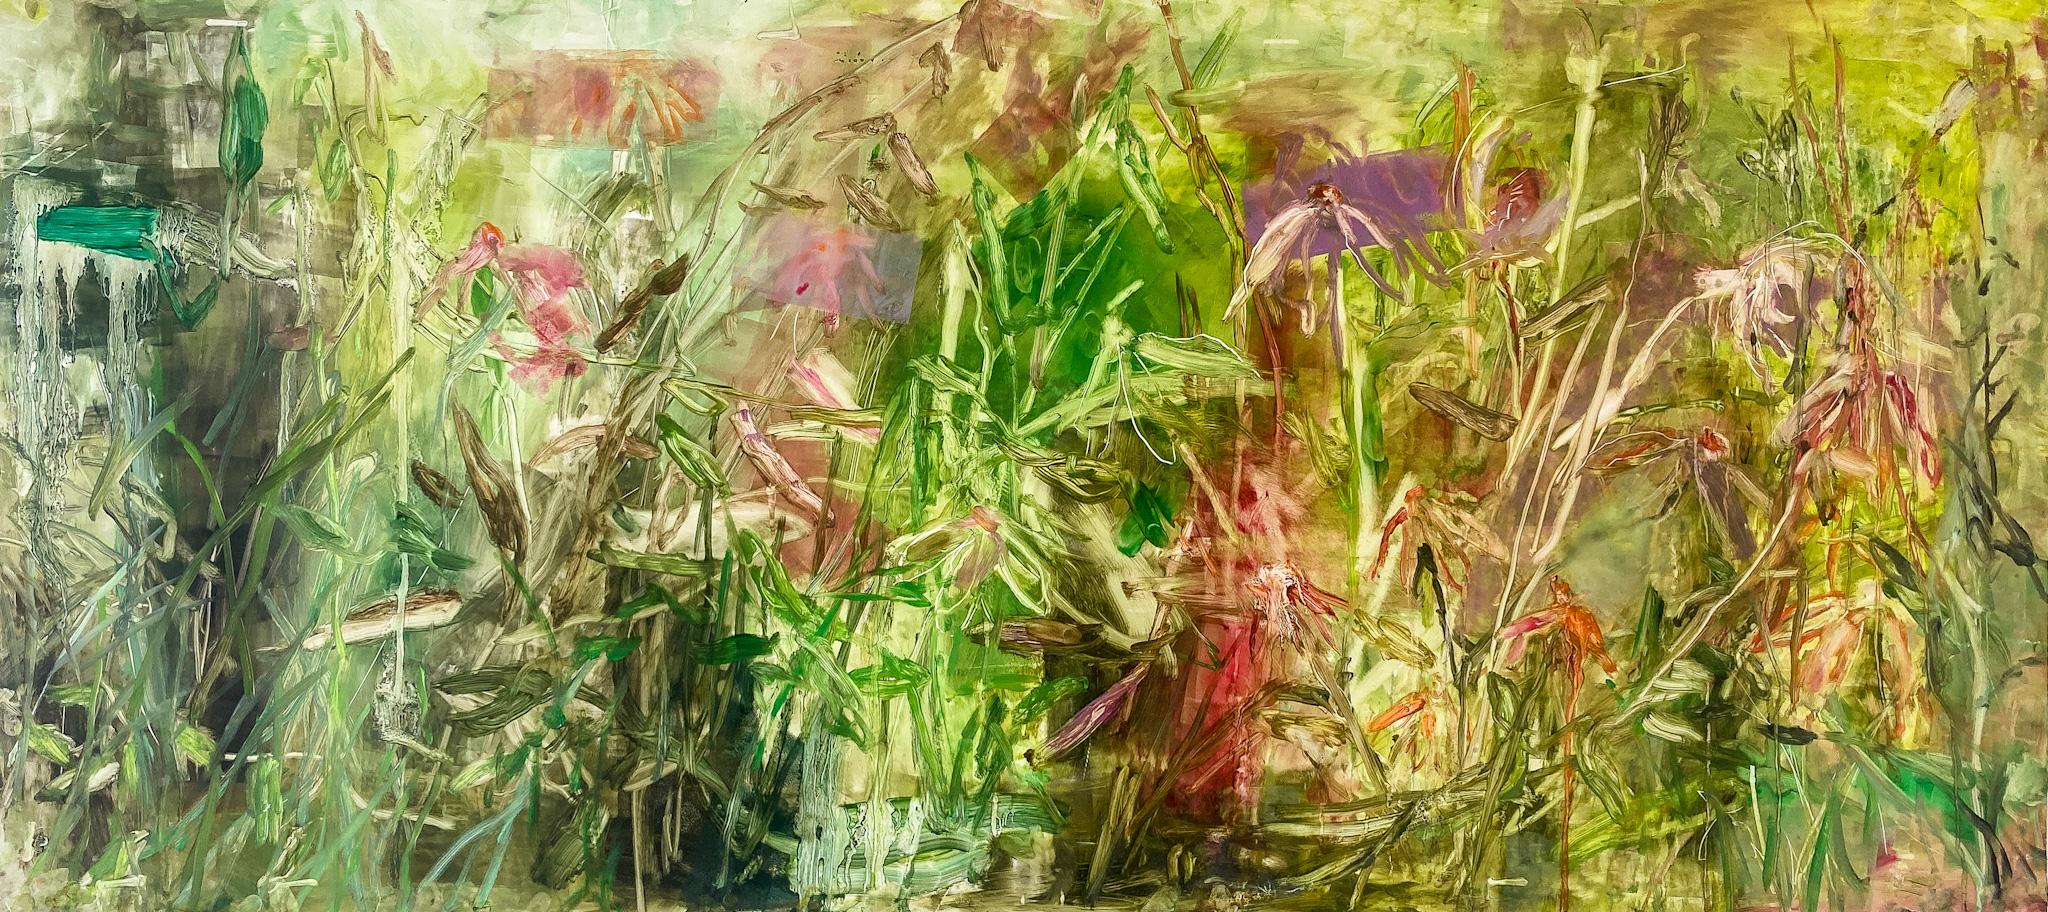 SPRING EQUINOX CYCLE II - Oil on Yupo Panel Painting of Plant Life in the Forest